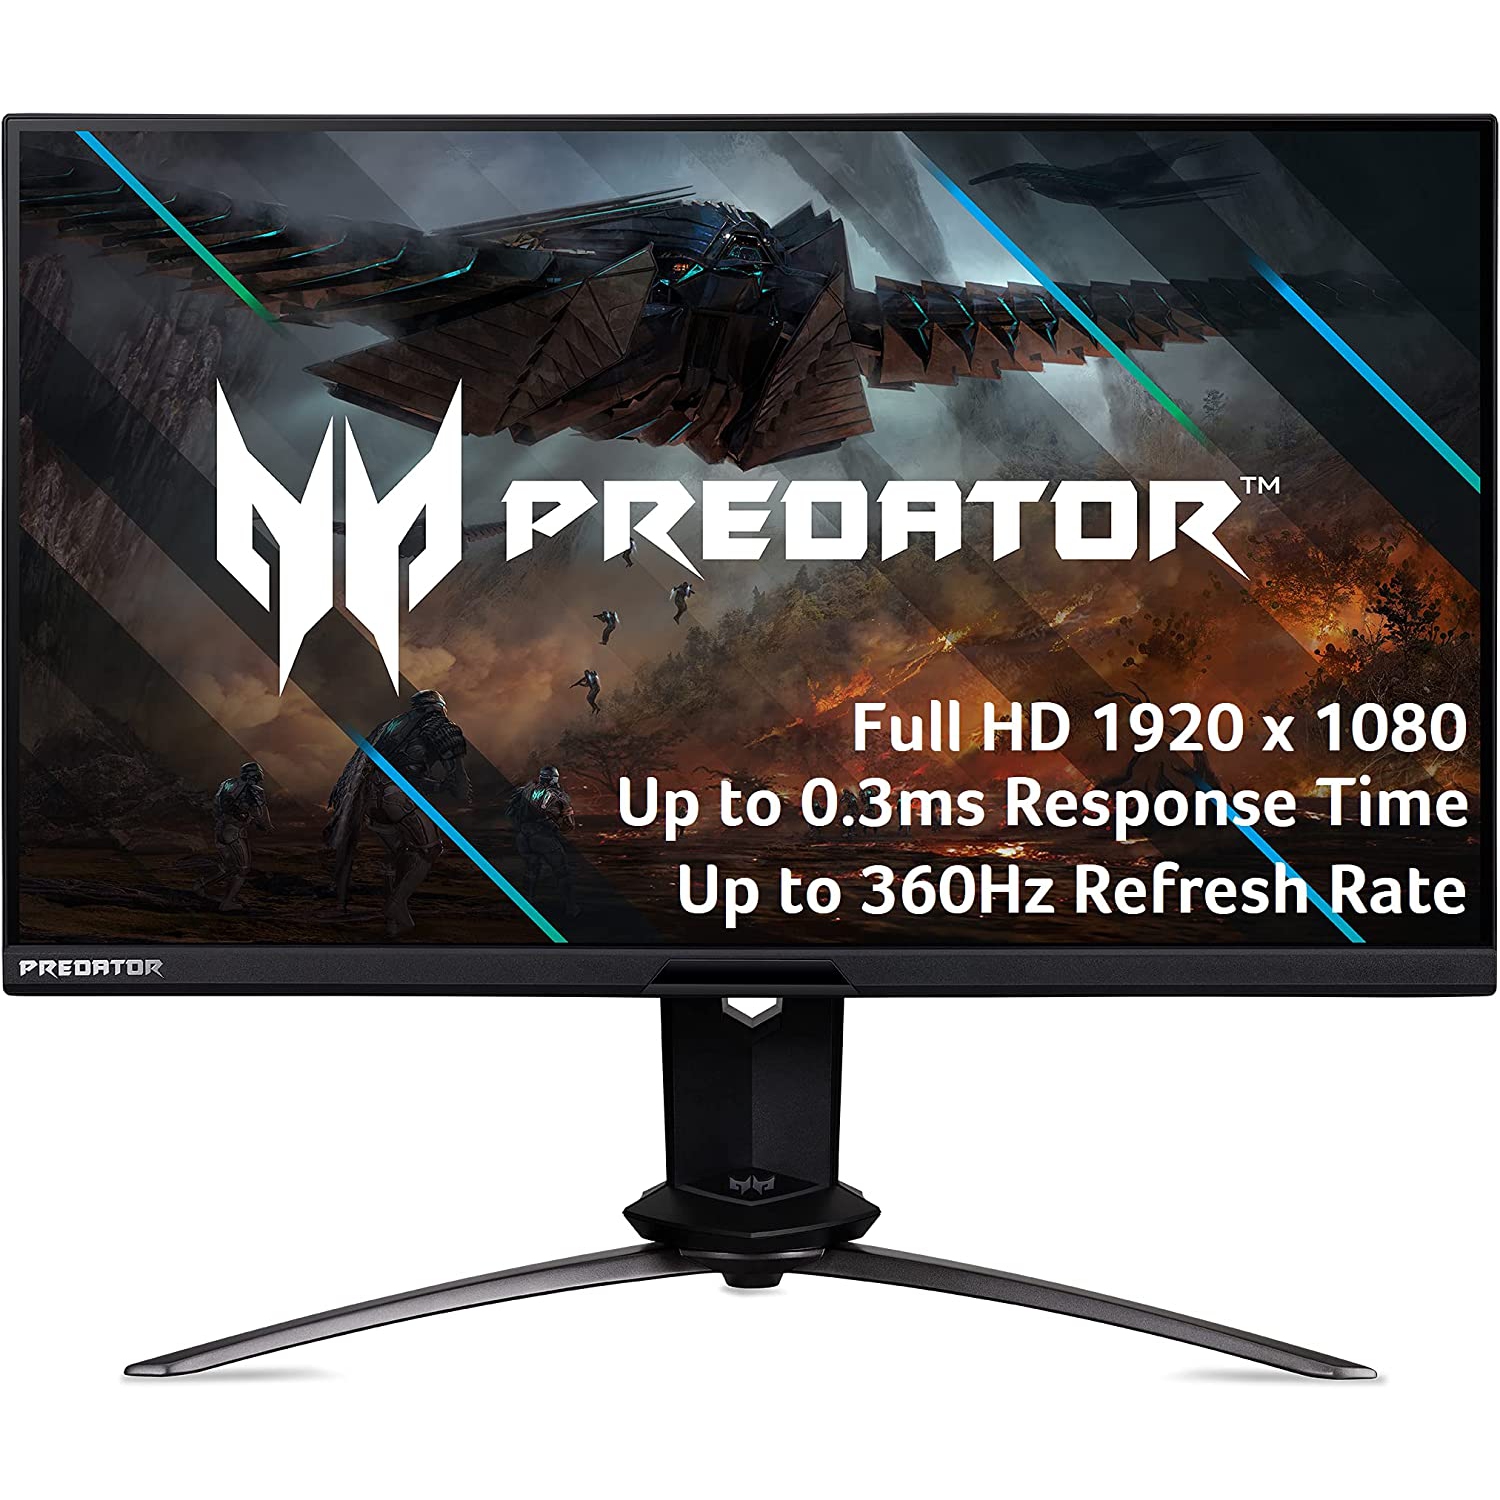 Acer Predator X25 bmiiprzx 24.5" FHD (1920 x 1080) Dual Drive IPS Gaming Monitor ,NVIDIA G-SYNC ,Up to 360Hz ,Up to 0.3ms ,400nit ,DisplayHDR 400 ,Display Port 1.4 & HDMI